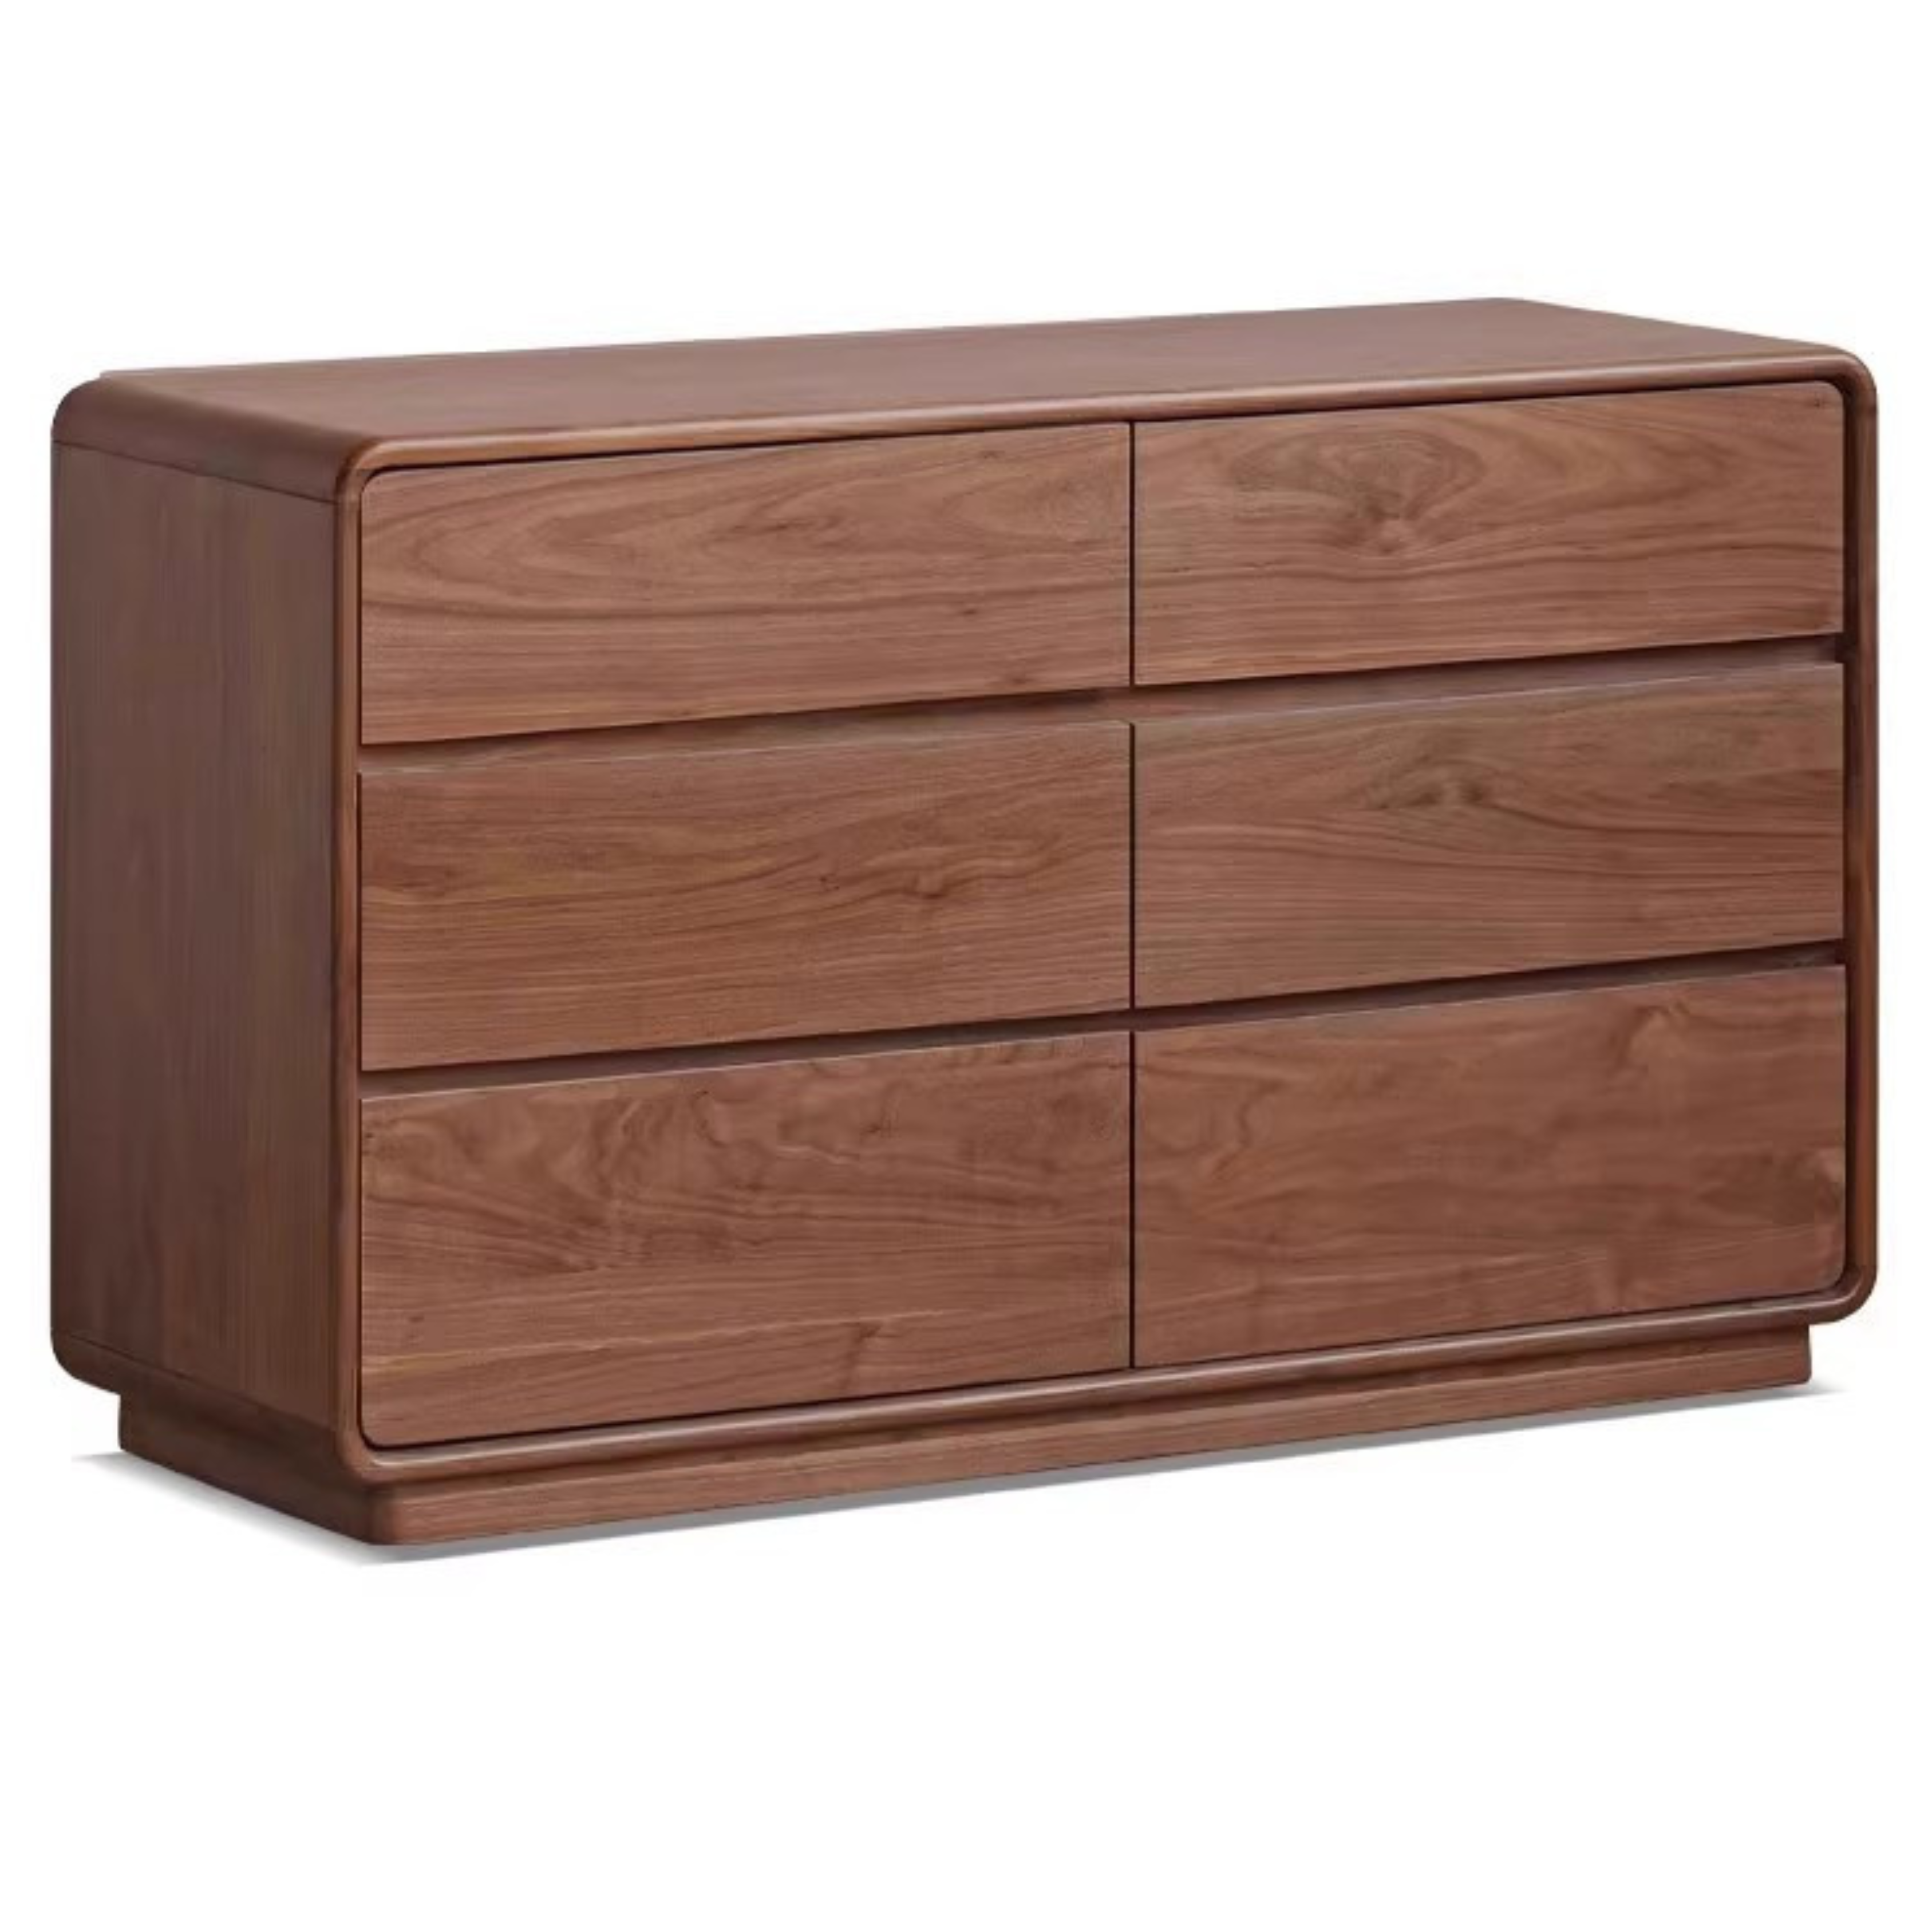 Black Walnut solid Wood Storage Cabinet chest of drawers)